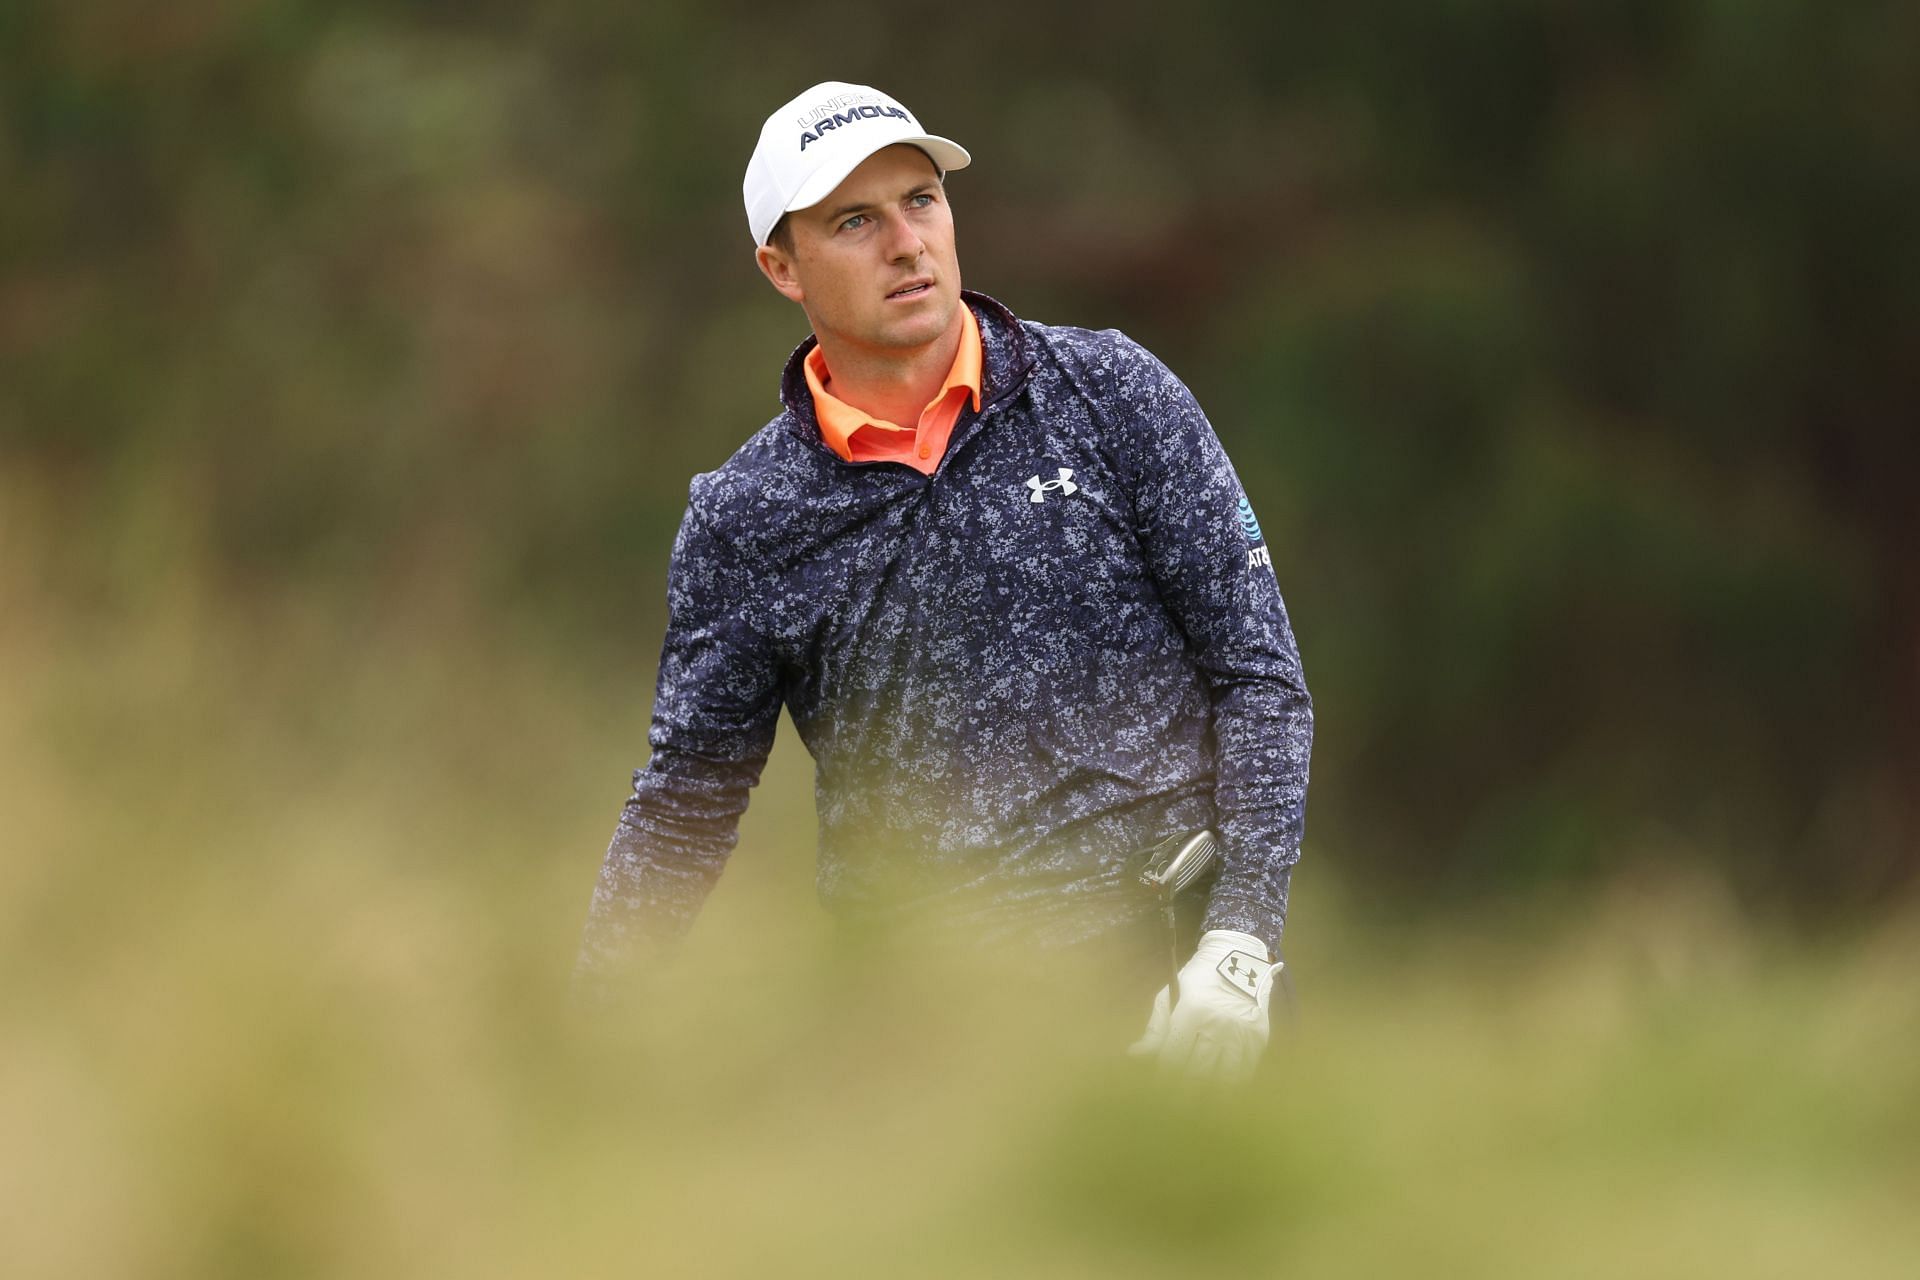 Jordan Spieth failed to make a cut at the U.S. Open Championship